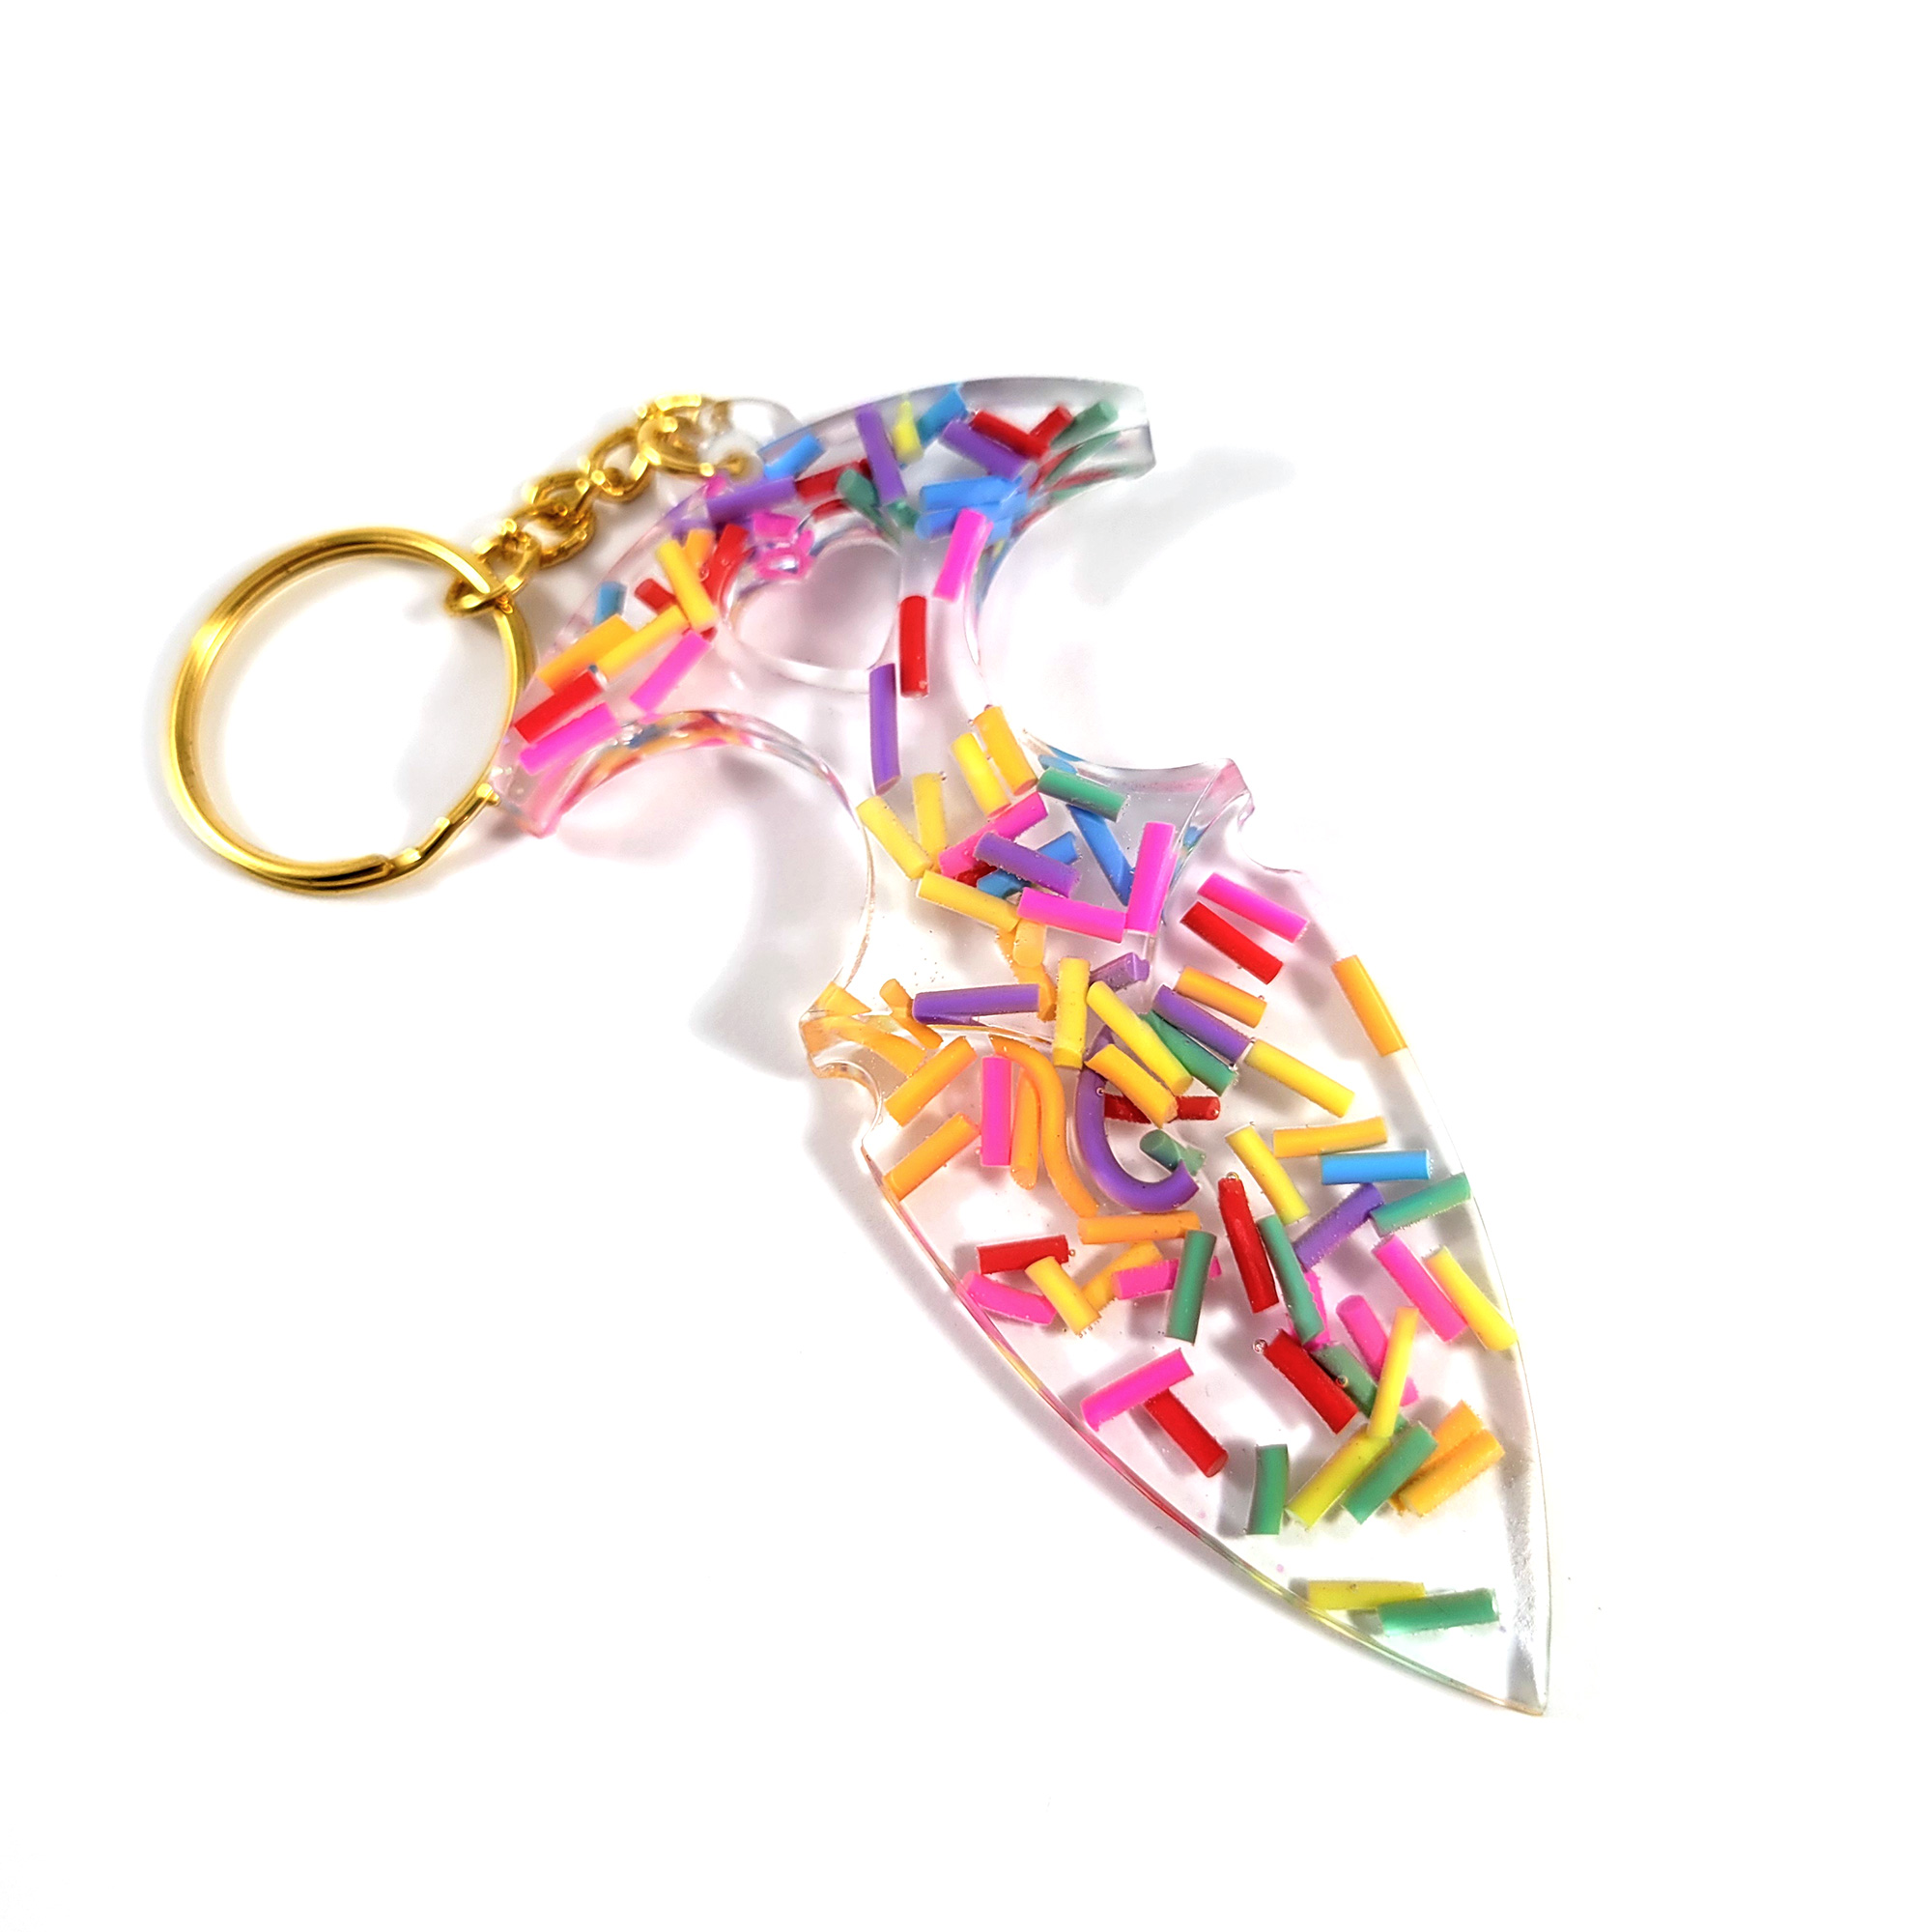 Sweetheart Safety Keychains by Wilde Designs